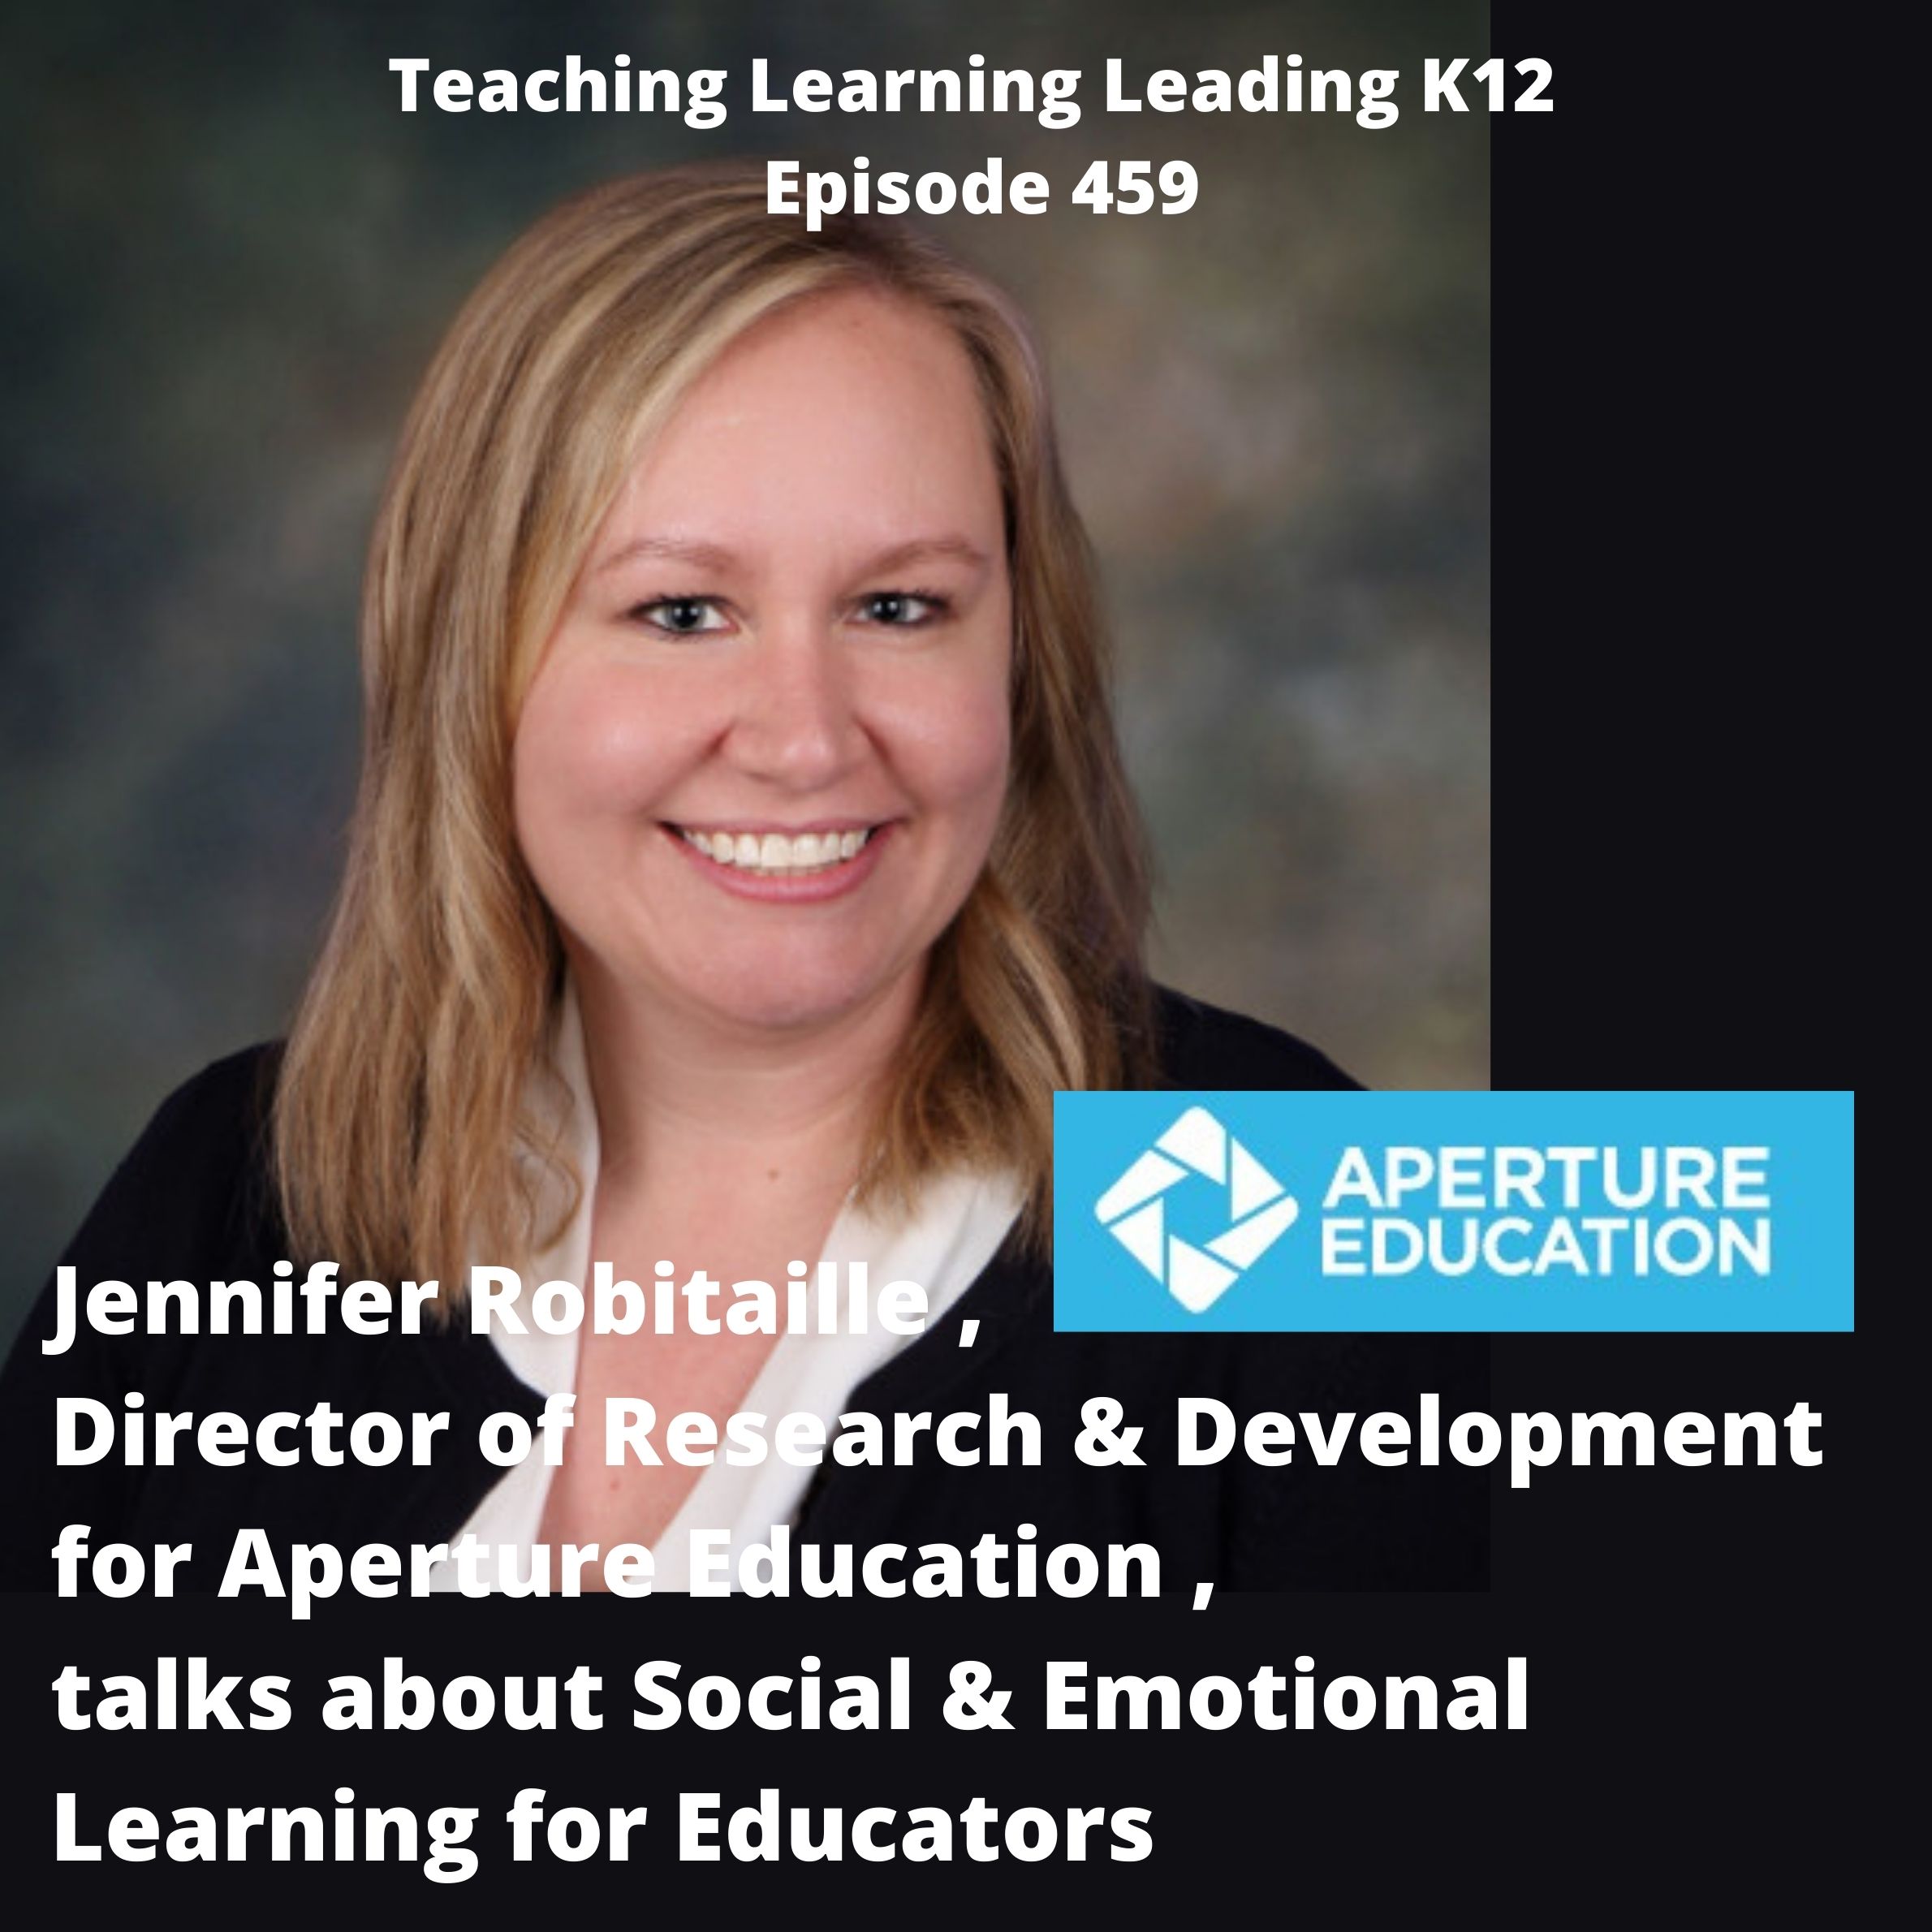 Jennifer Robitaille, Director of Research and Development for Aperture Education, Talks About Social & Emotional Learning for Educators - 459